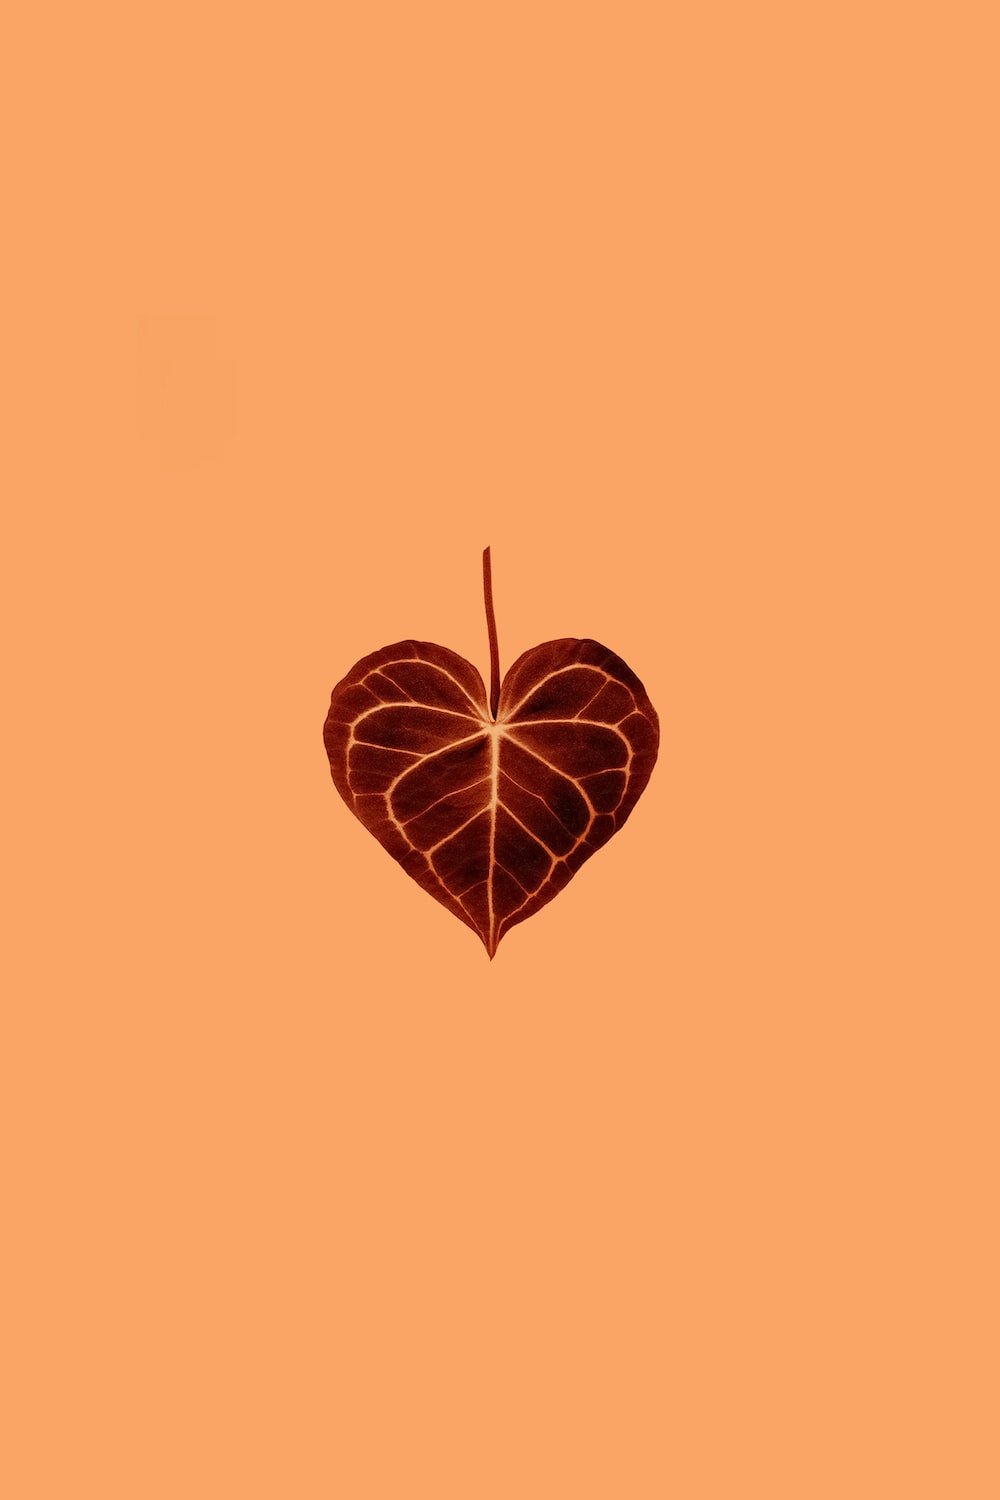 A single leaf in the shape of a heart on a solid orange background. - Black heart